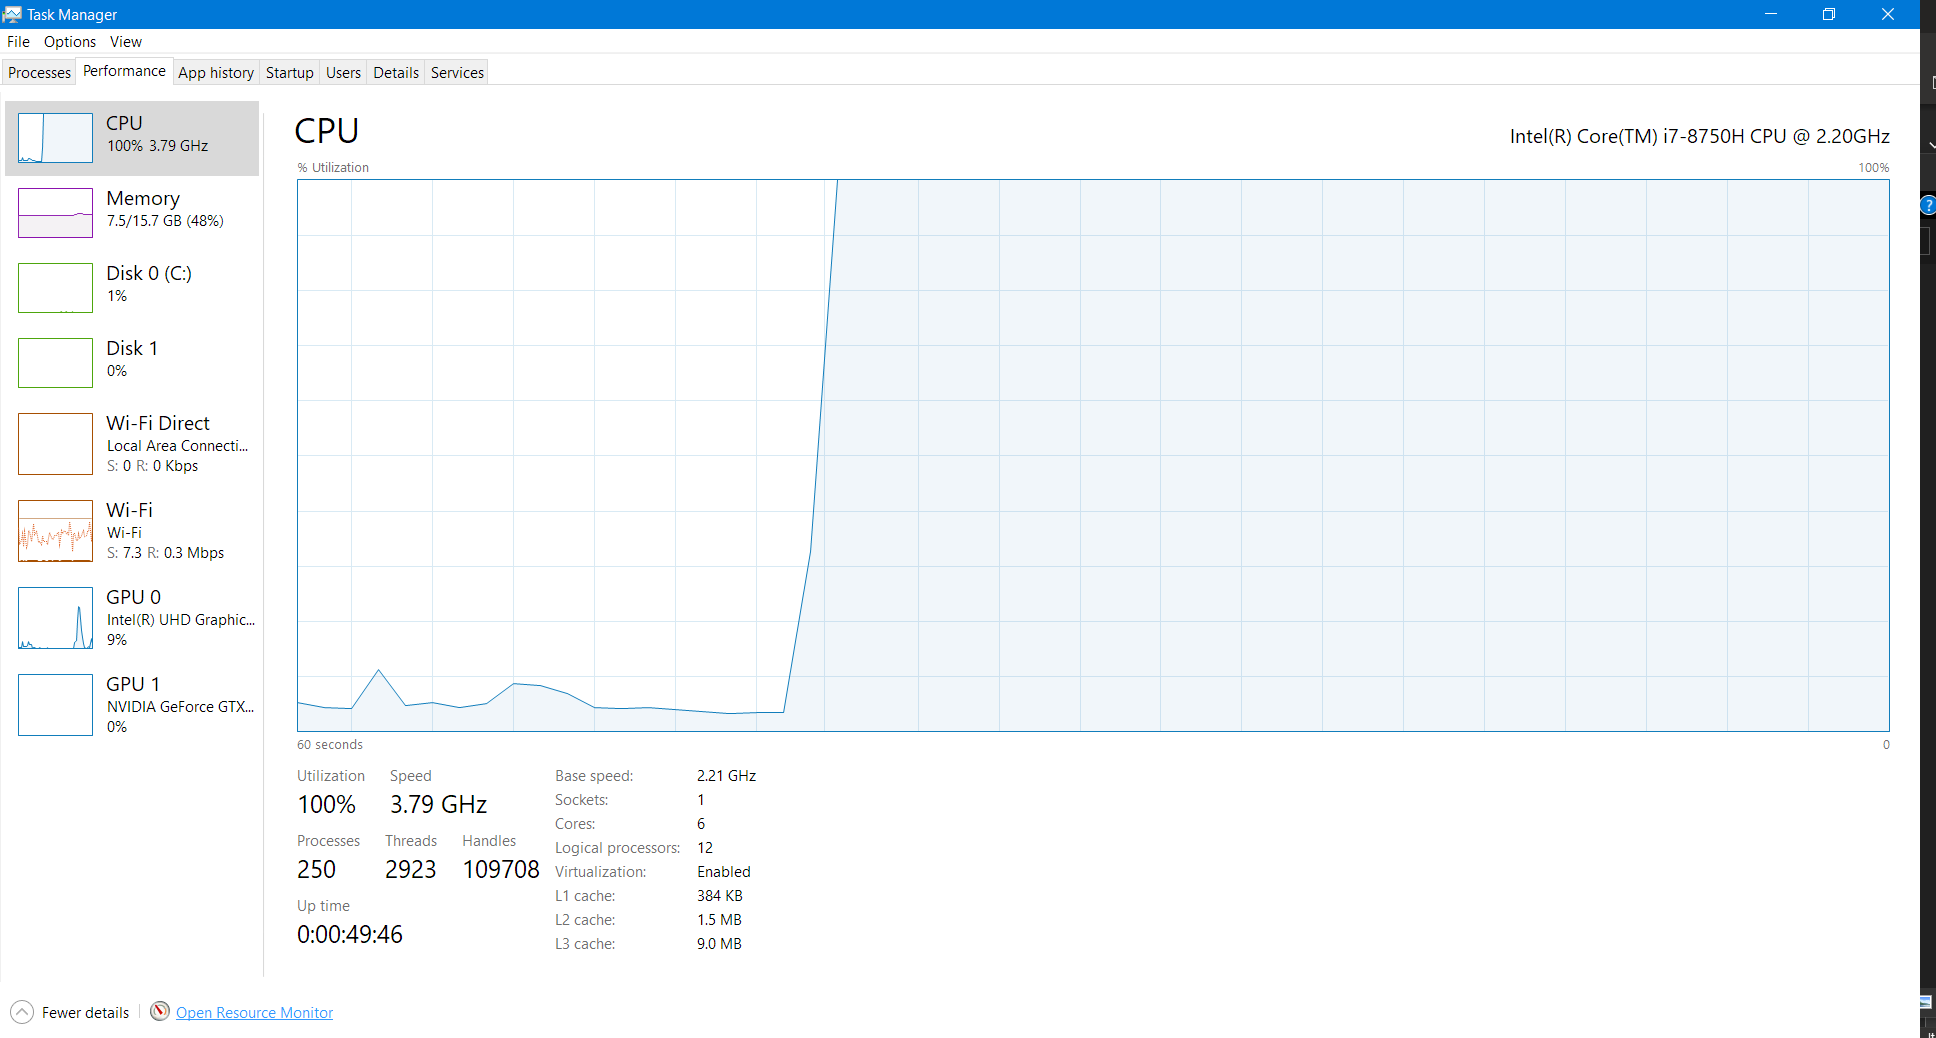 100% CPU usage while on AC power - System Interrupts problem 58d994e8-e8f1-4ee7-b0e7-828212f269b6?upload=true.png